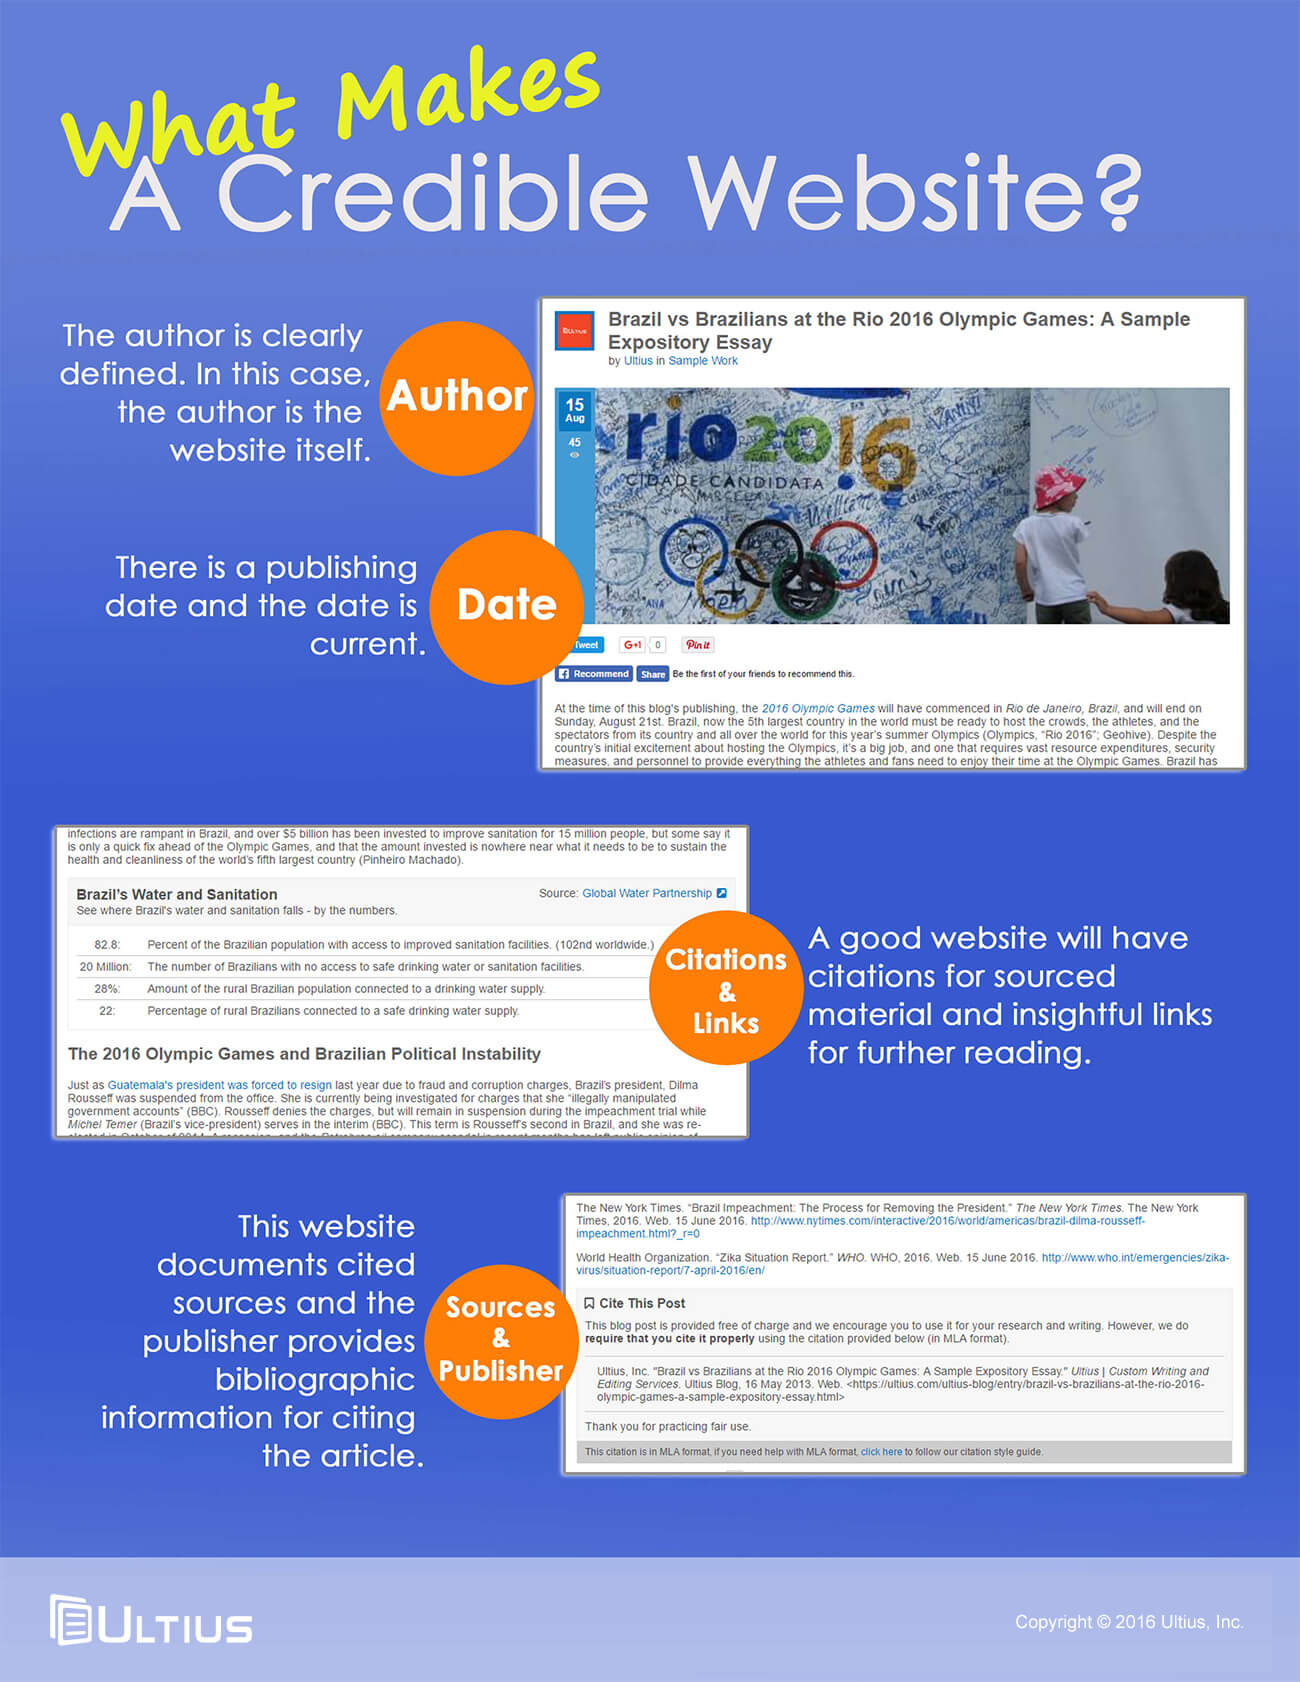 Ultius Infographic | What Makes a Credible Website Source?